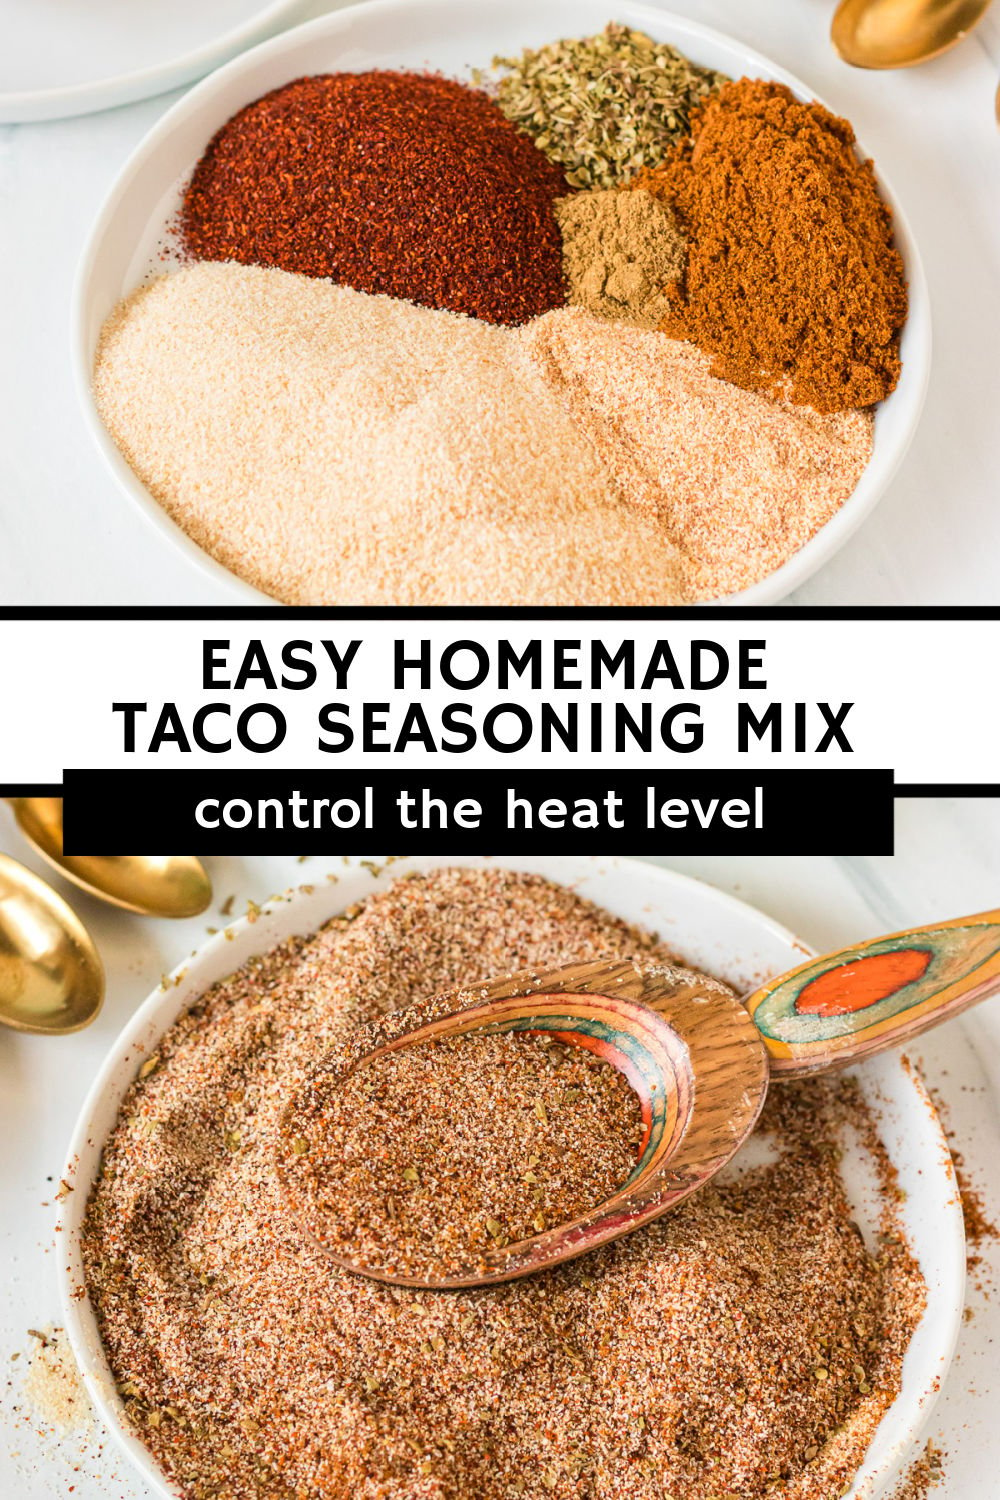 This homemade taco seasoning mix is easy to put together at home and allows you to control the perfect amount of spices. You'll never pick up a packet from the store again! | www.persnicketyplates.com